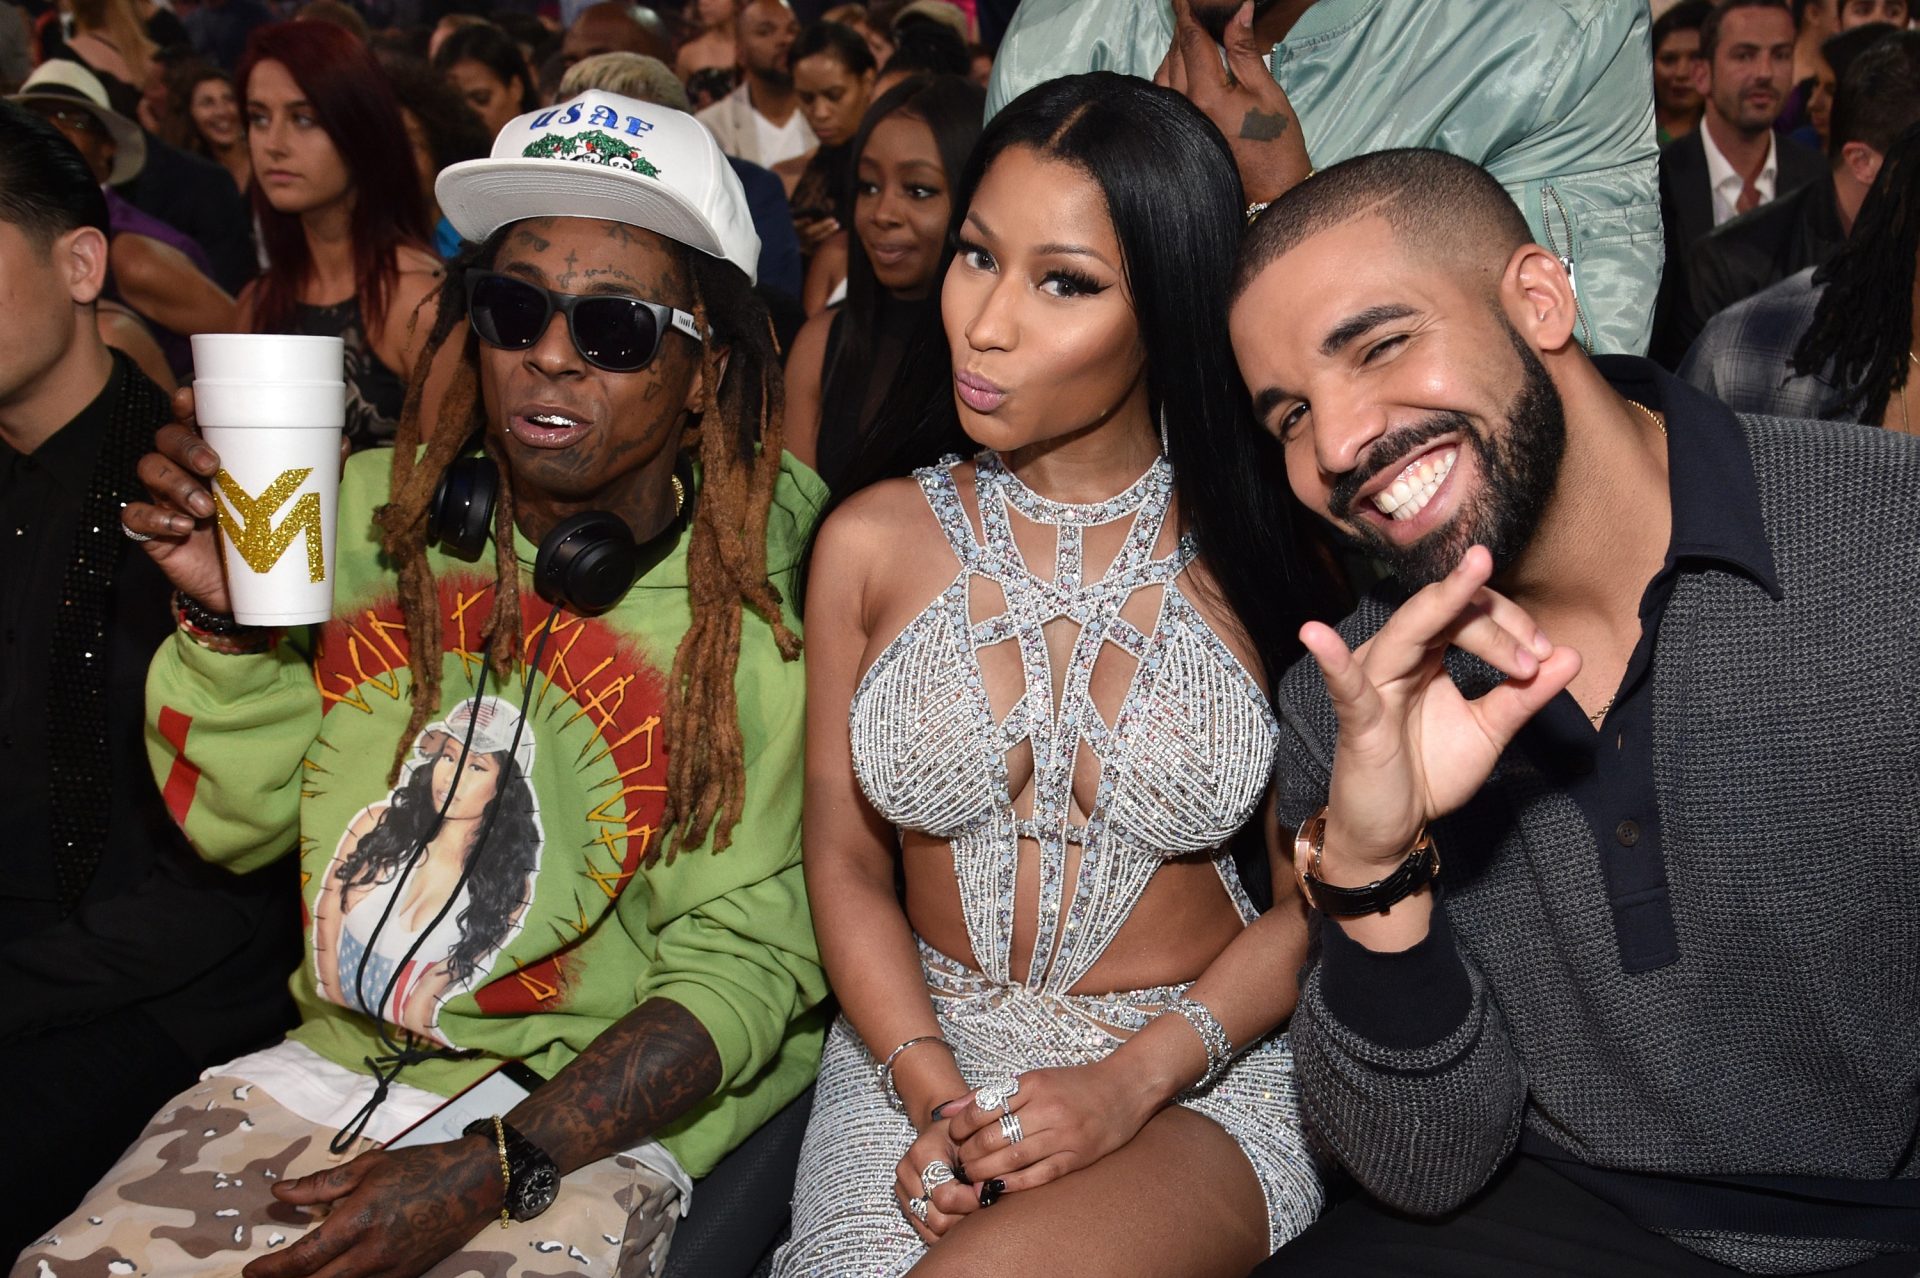 Lil Wayne, Drake and Nicki Minaj reunite on stage for a Young Money reunion as a part of Drake's OVO Fest in Toronto.